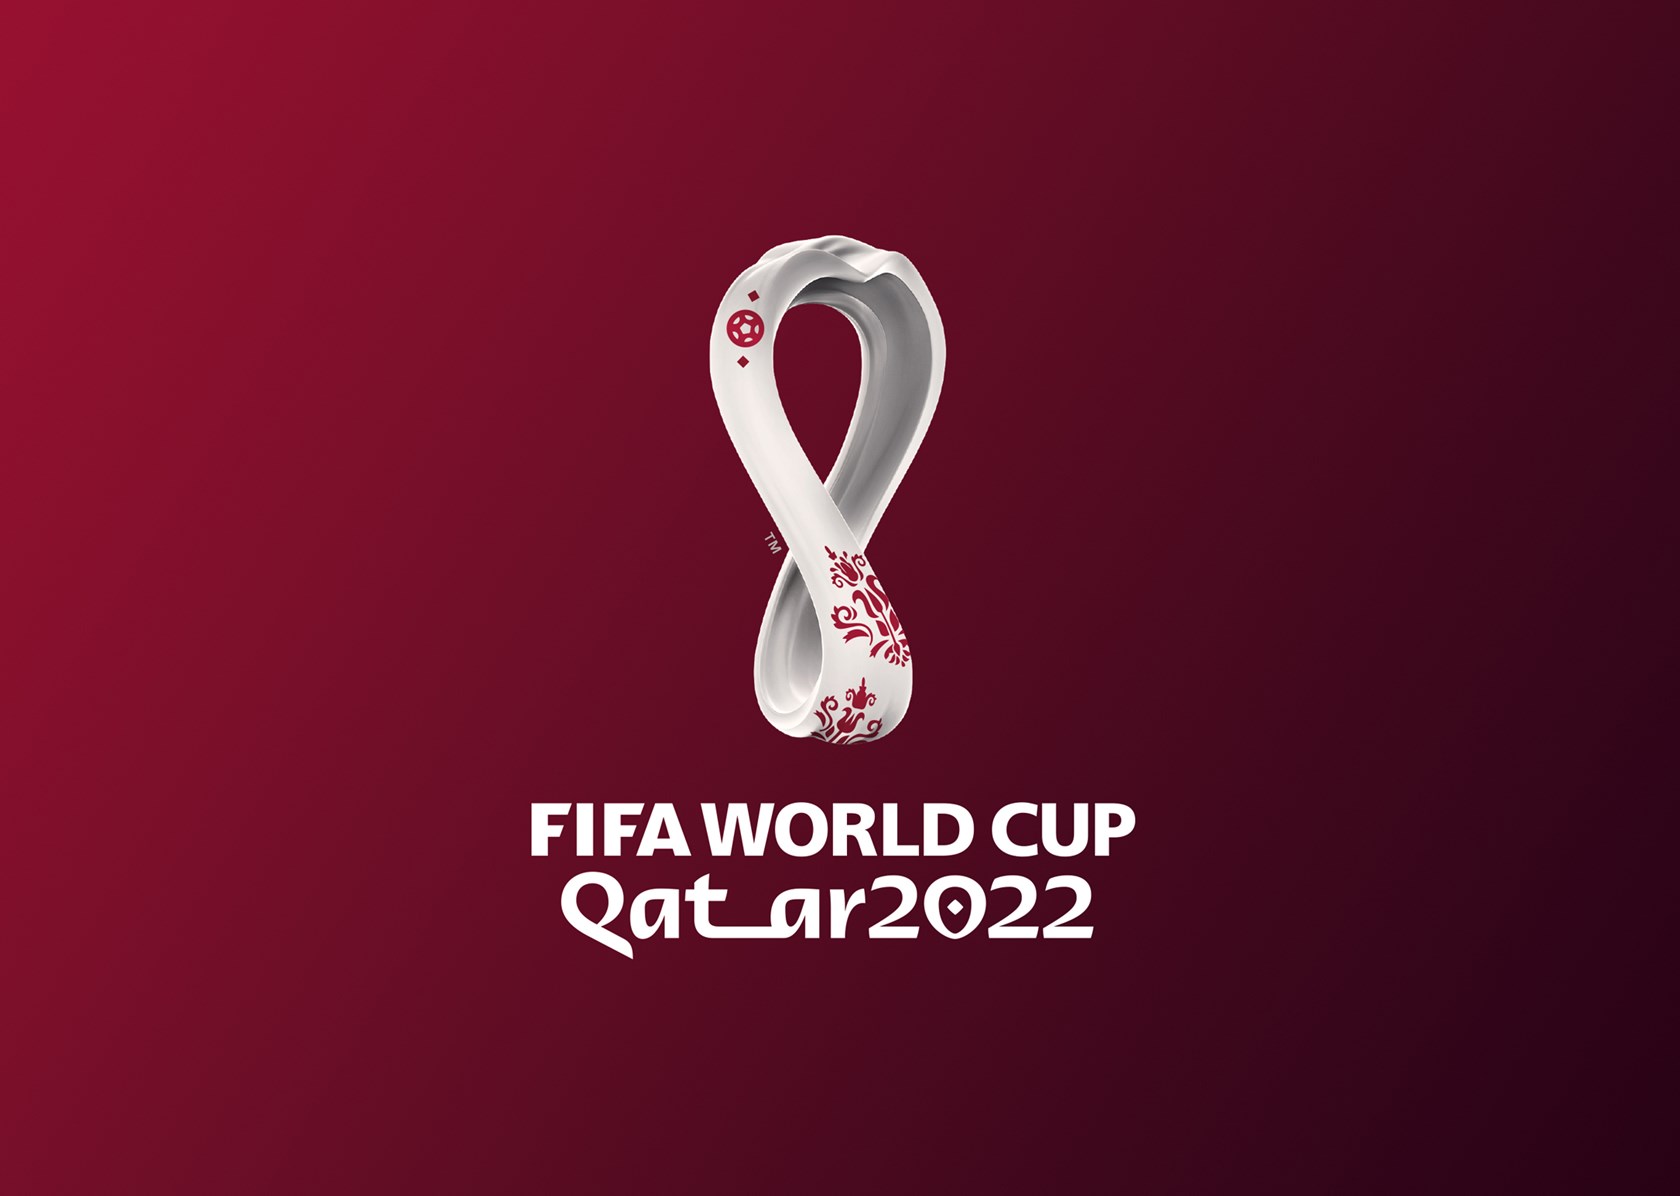 FIFA World Cup Qatar 2022™ —
A loop of culture and football